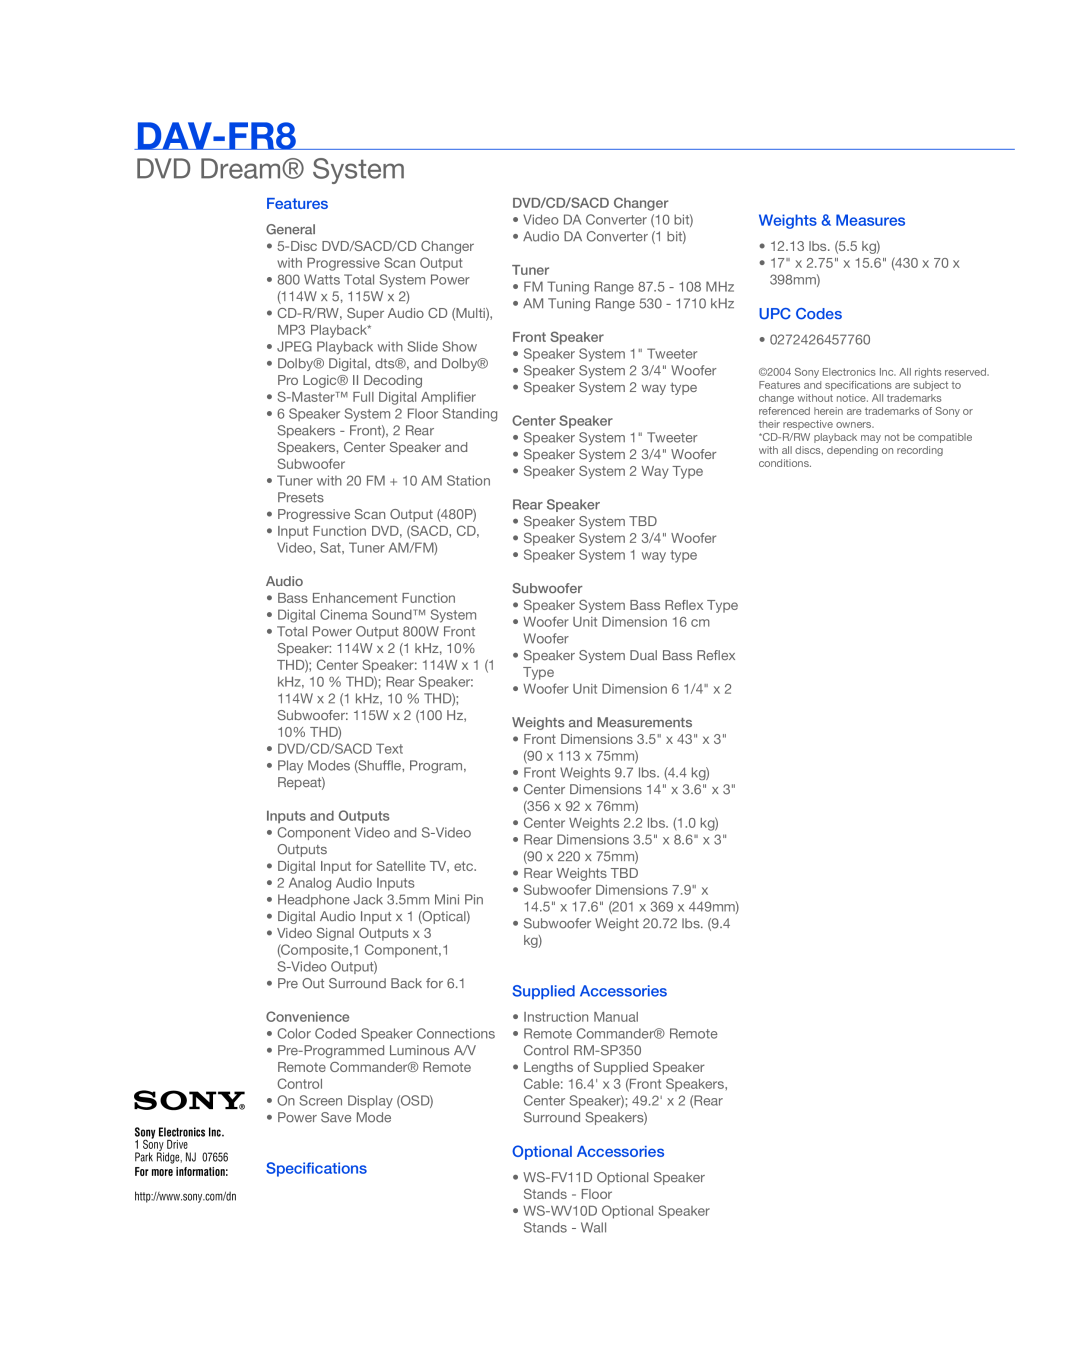 Sony DVD DREAM SYSTEM DAV-FR8, DVD Dream System, Features, Specifications, Supplied Accessories, Optional Accessories 